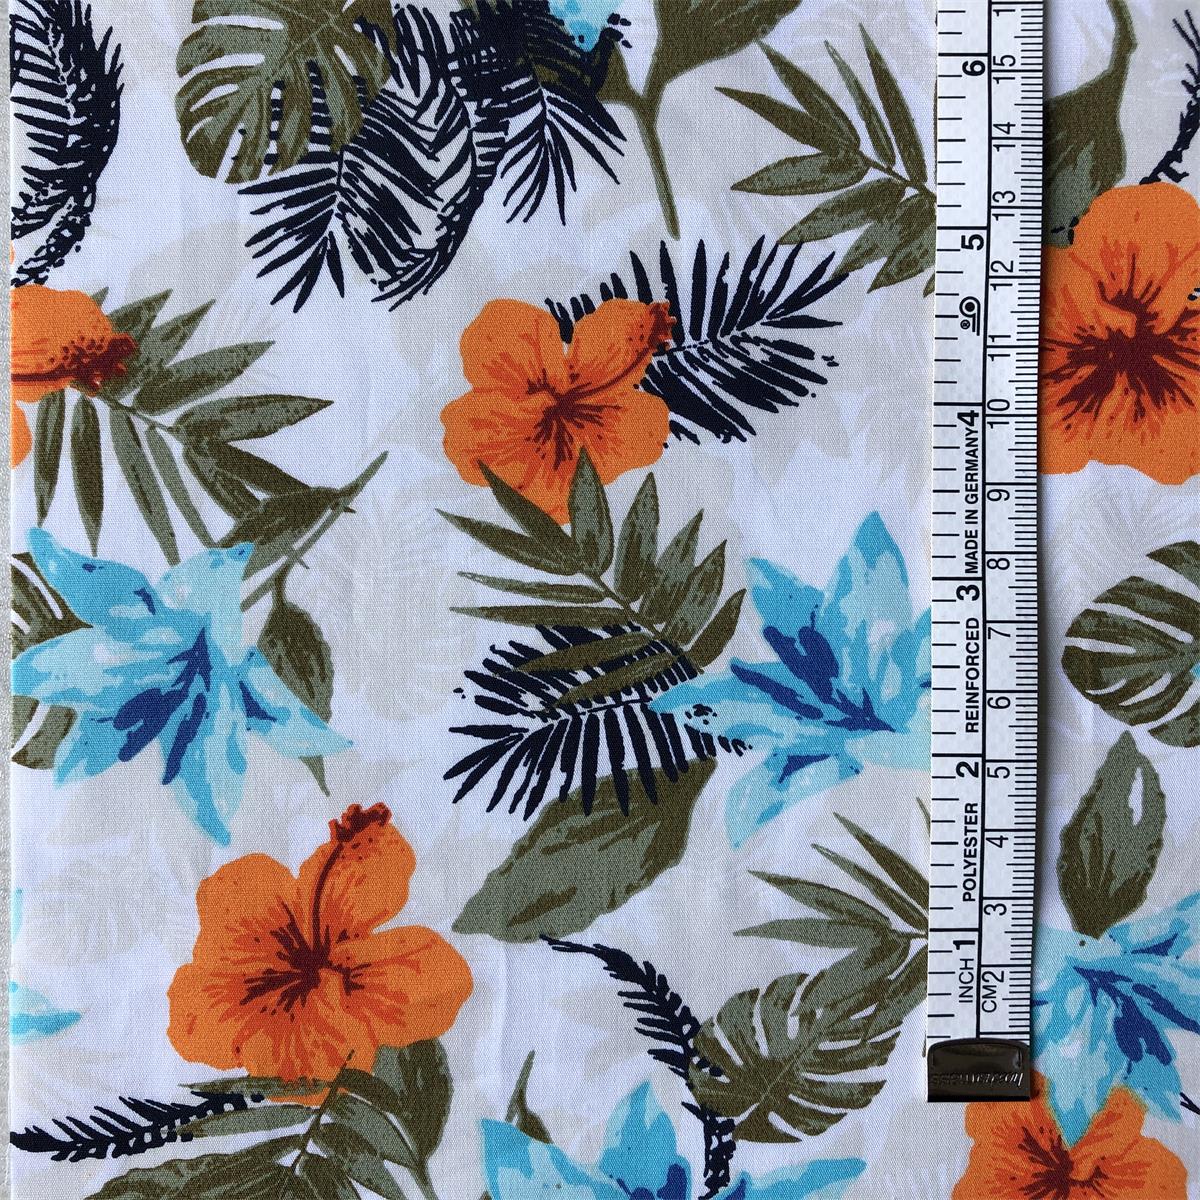 Sun-rising Textile Cotton fabric for men's casual shirts 100%cotton poplin printed shirts woven fabric soft touch